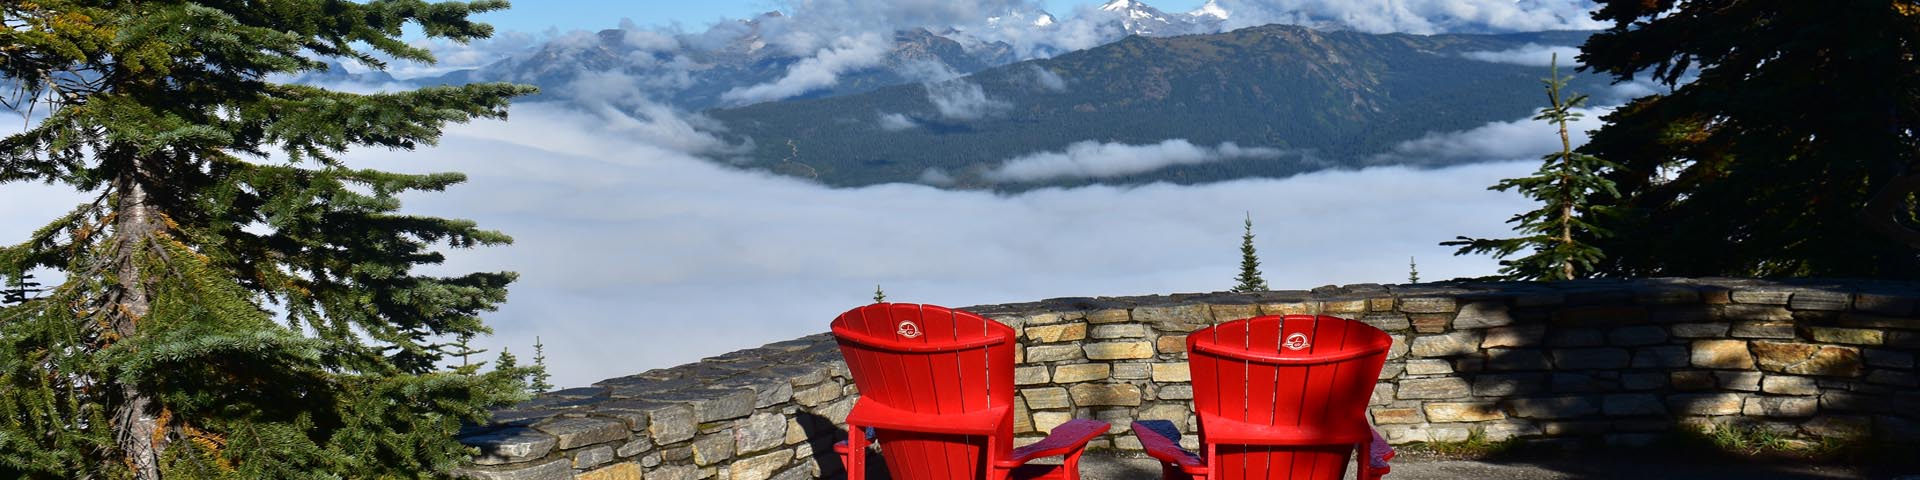 Two red chairs sit behind a stone wall at a mountain viewpoint